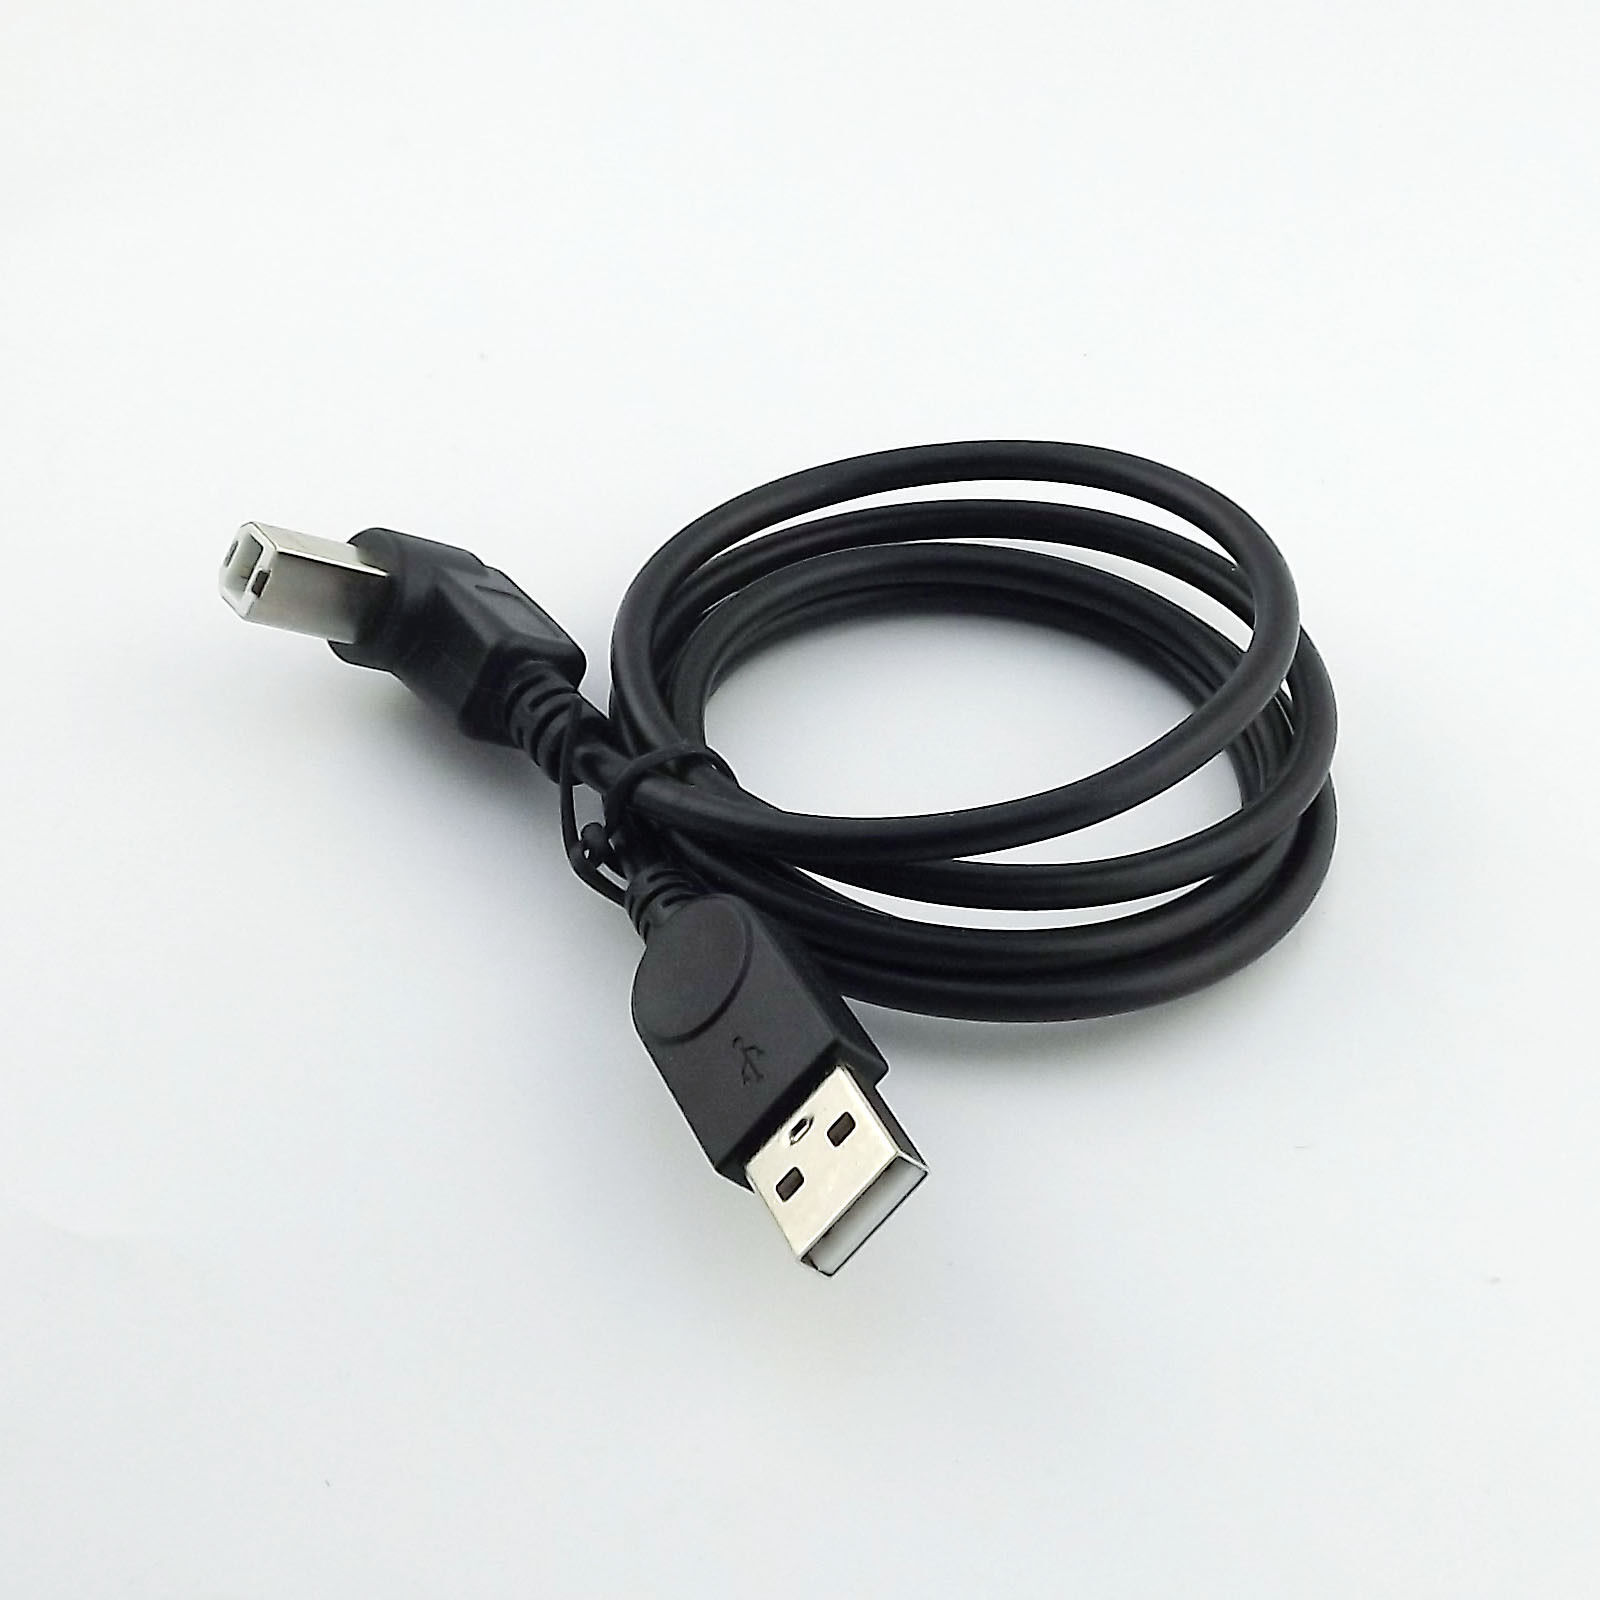 1x USB 2.0 Printer A Male to B Male Plug Up Angle 90 Degree Scanner Cable Black